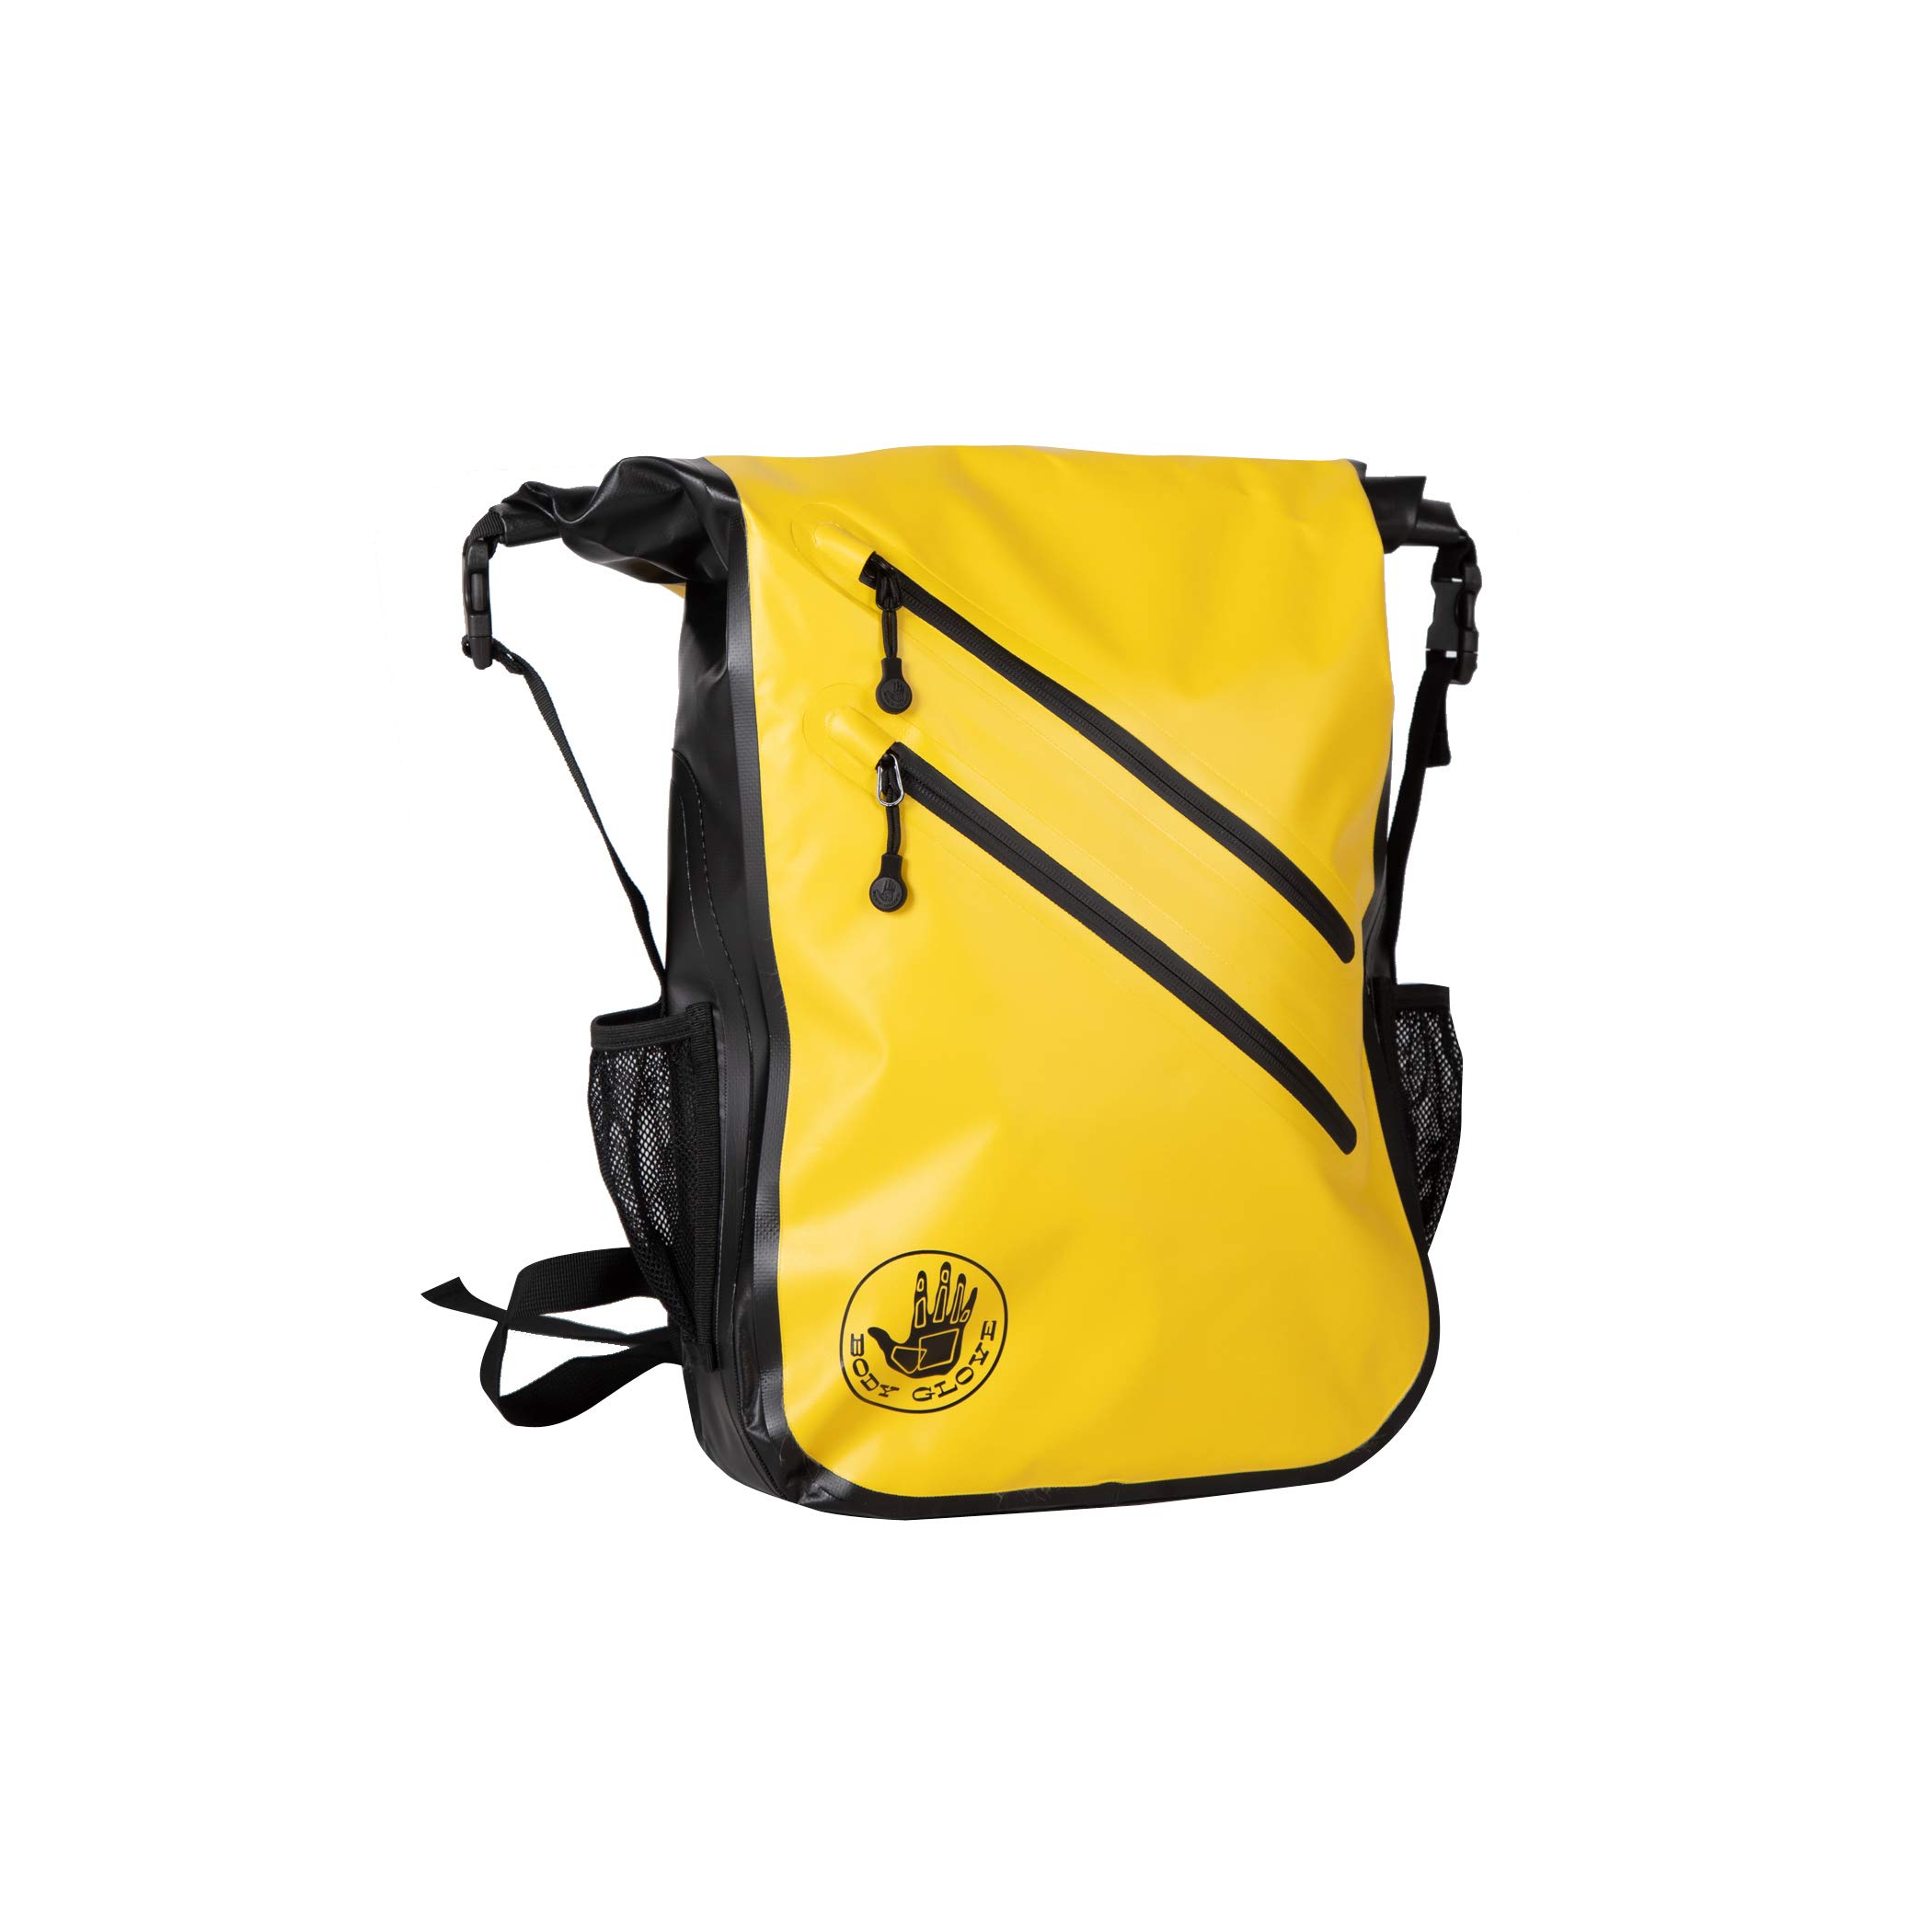 Body Glove Ruxton Waterproof Floatable Backpack for Surfing, Kayaking, Hiking, Camping, Water Sports, Gym with Tablet/Laptop Sleeve, Yellow, One Size